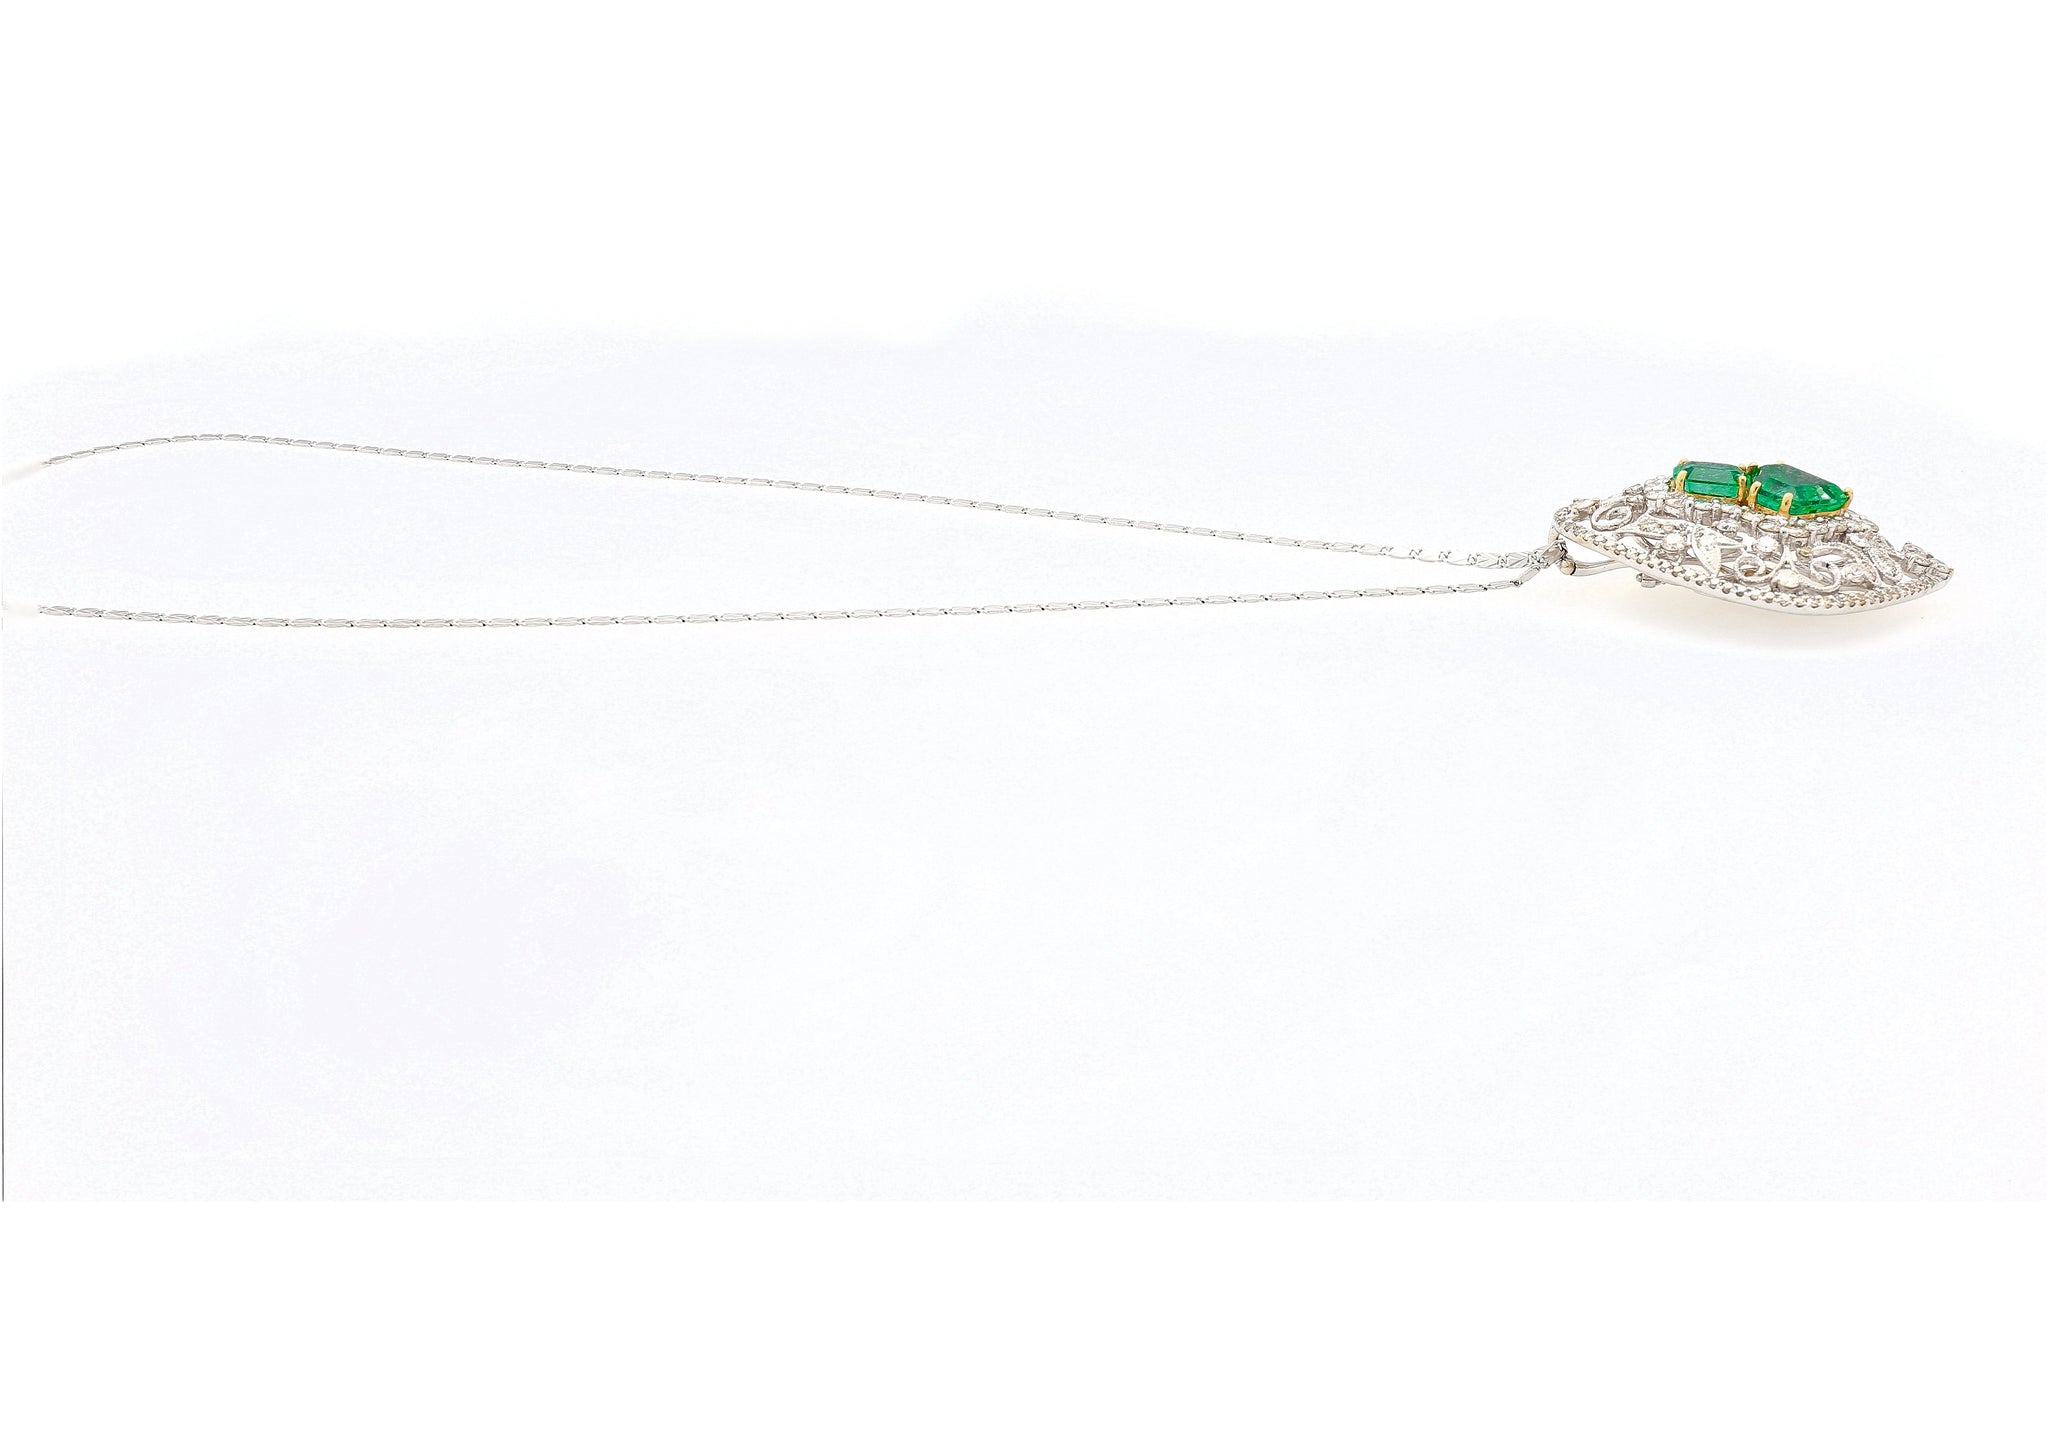 Vintage Art Nouveau Style Carved 18K White Gold Pendant Necklace With Shield Cut Emerald and Diamond Side Stones